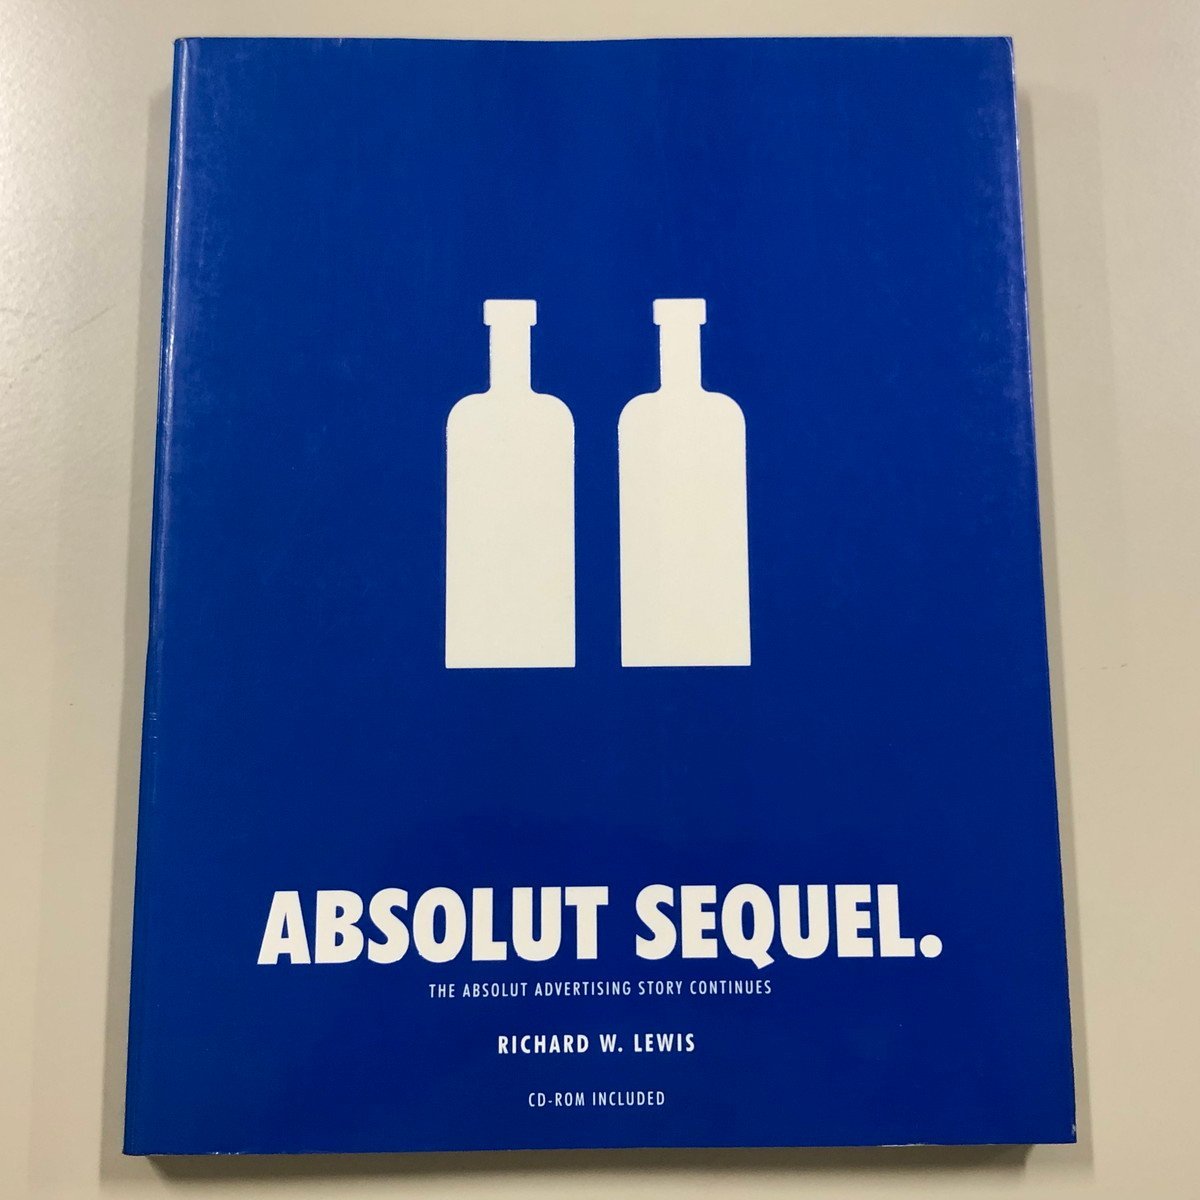 『 Absolut Sequel 』 The Absolut Advertising Story 　リチャード・W・ルイス 　デザインアート